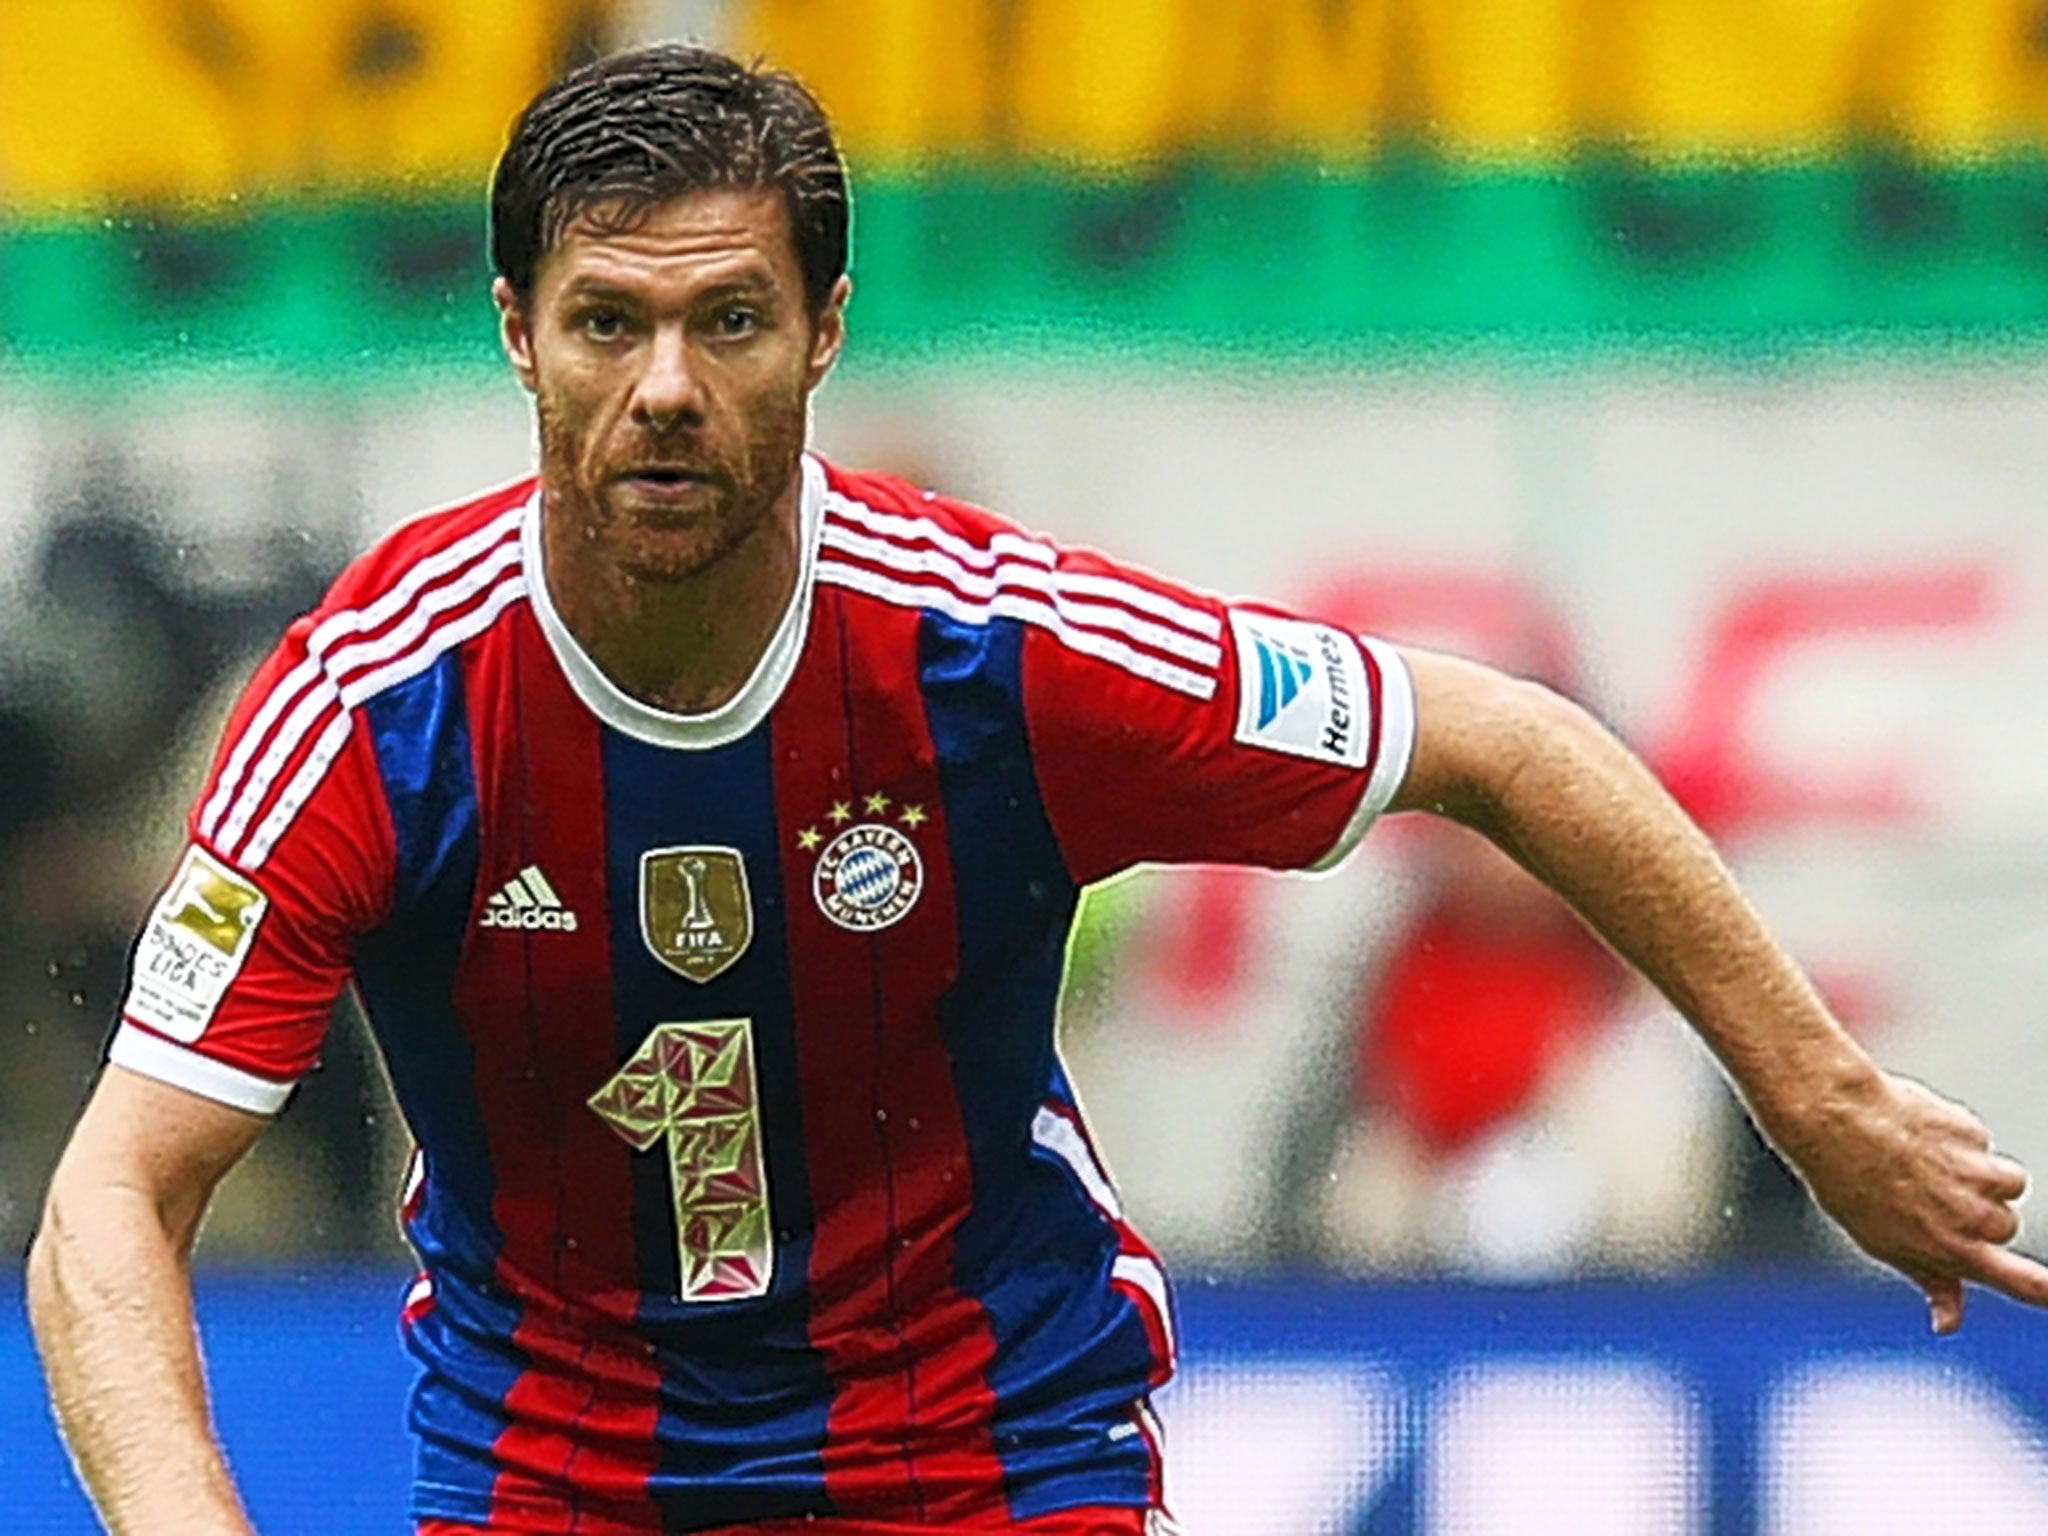 Xabi Alonso, who was vital in Real’s midfield, has joined Bayern Munich